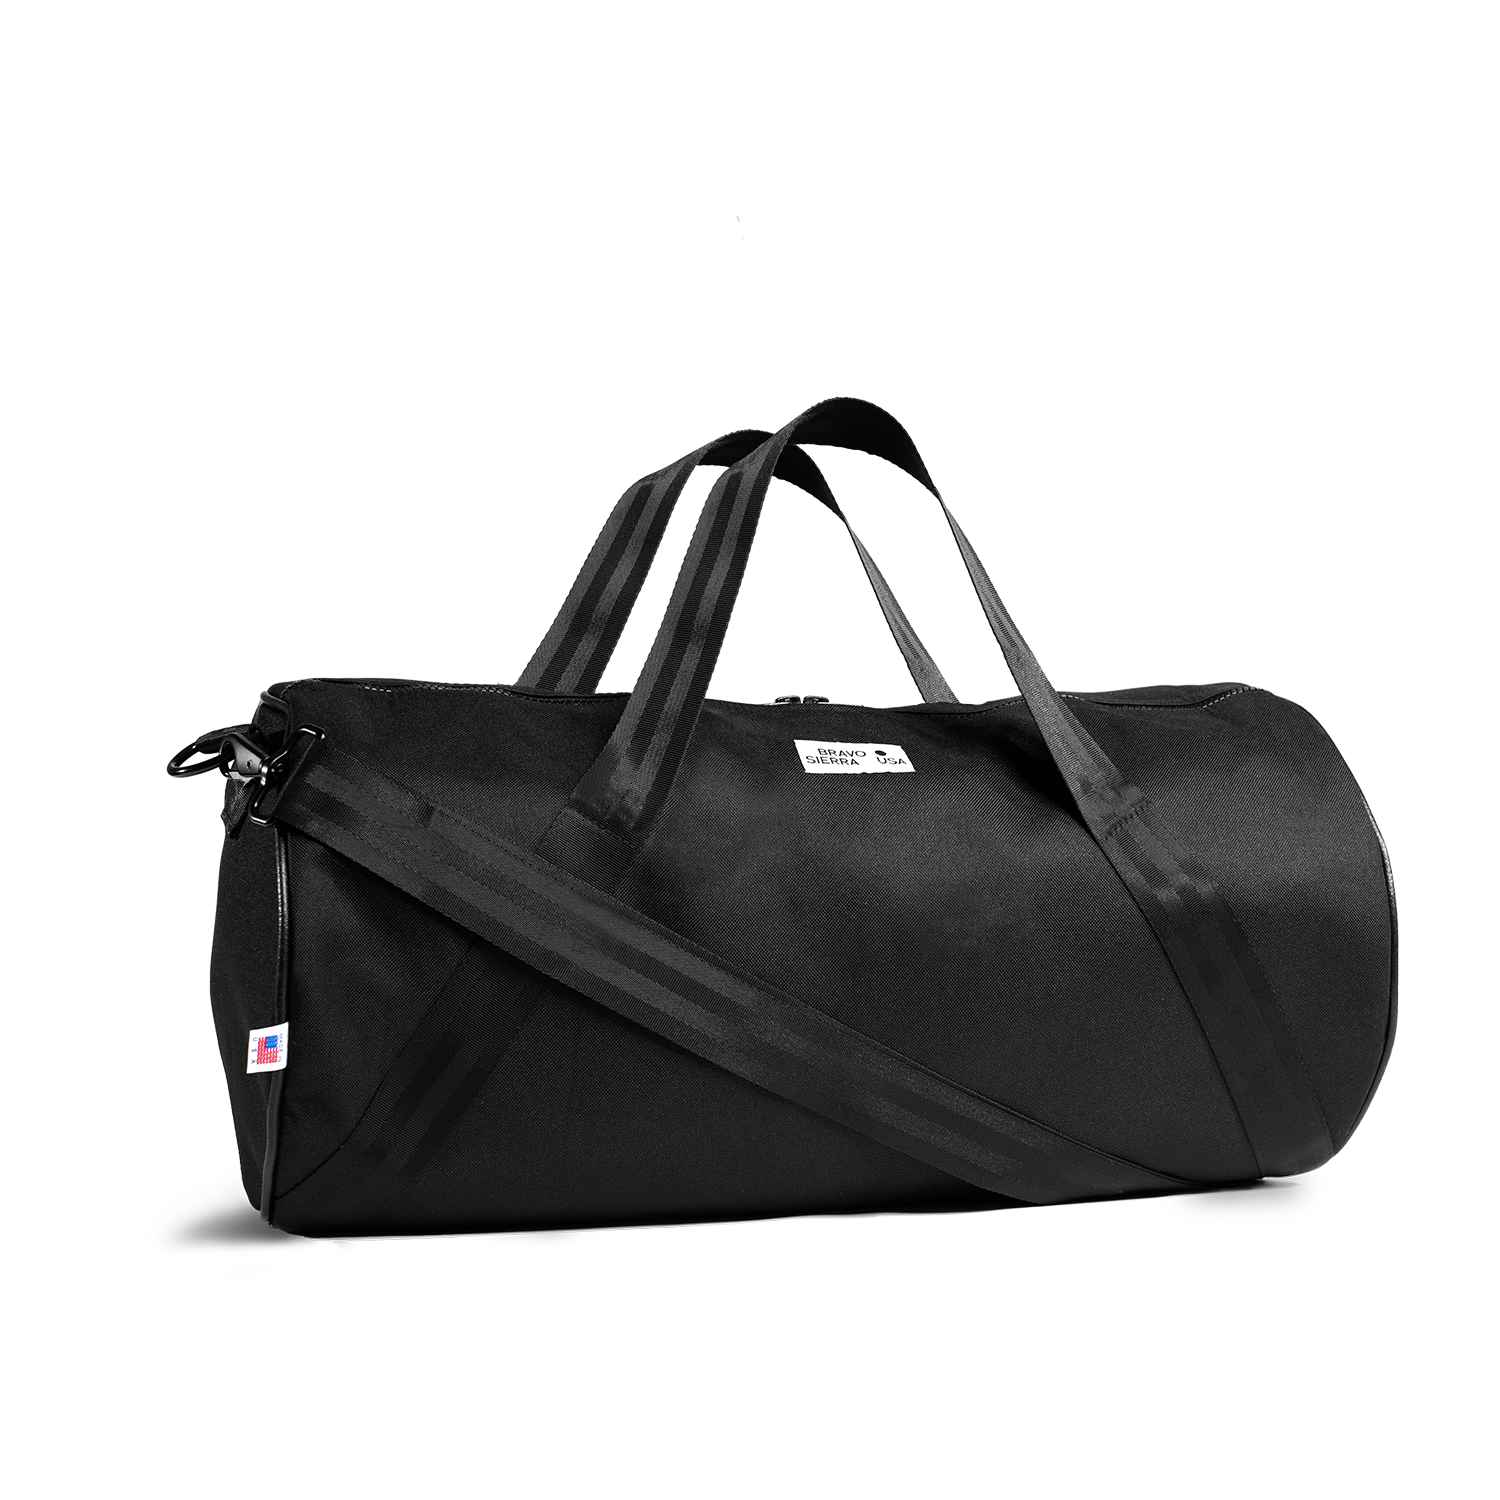 The Duffle Bag - Durable & Sleek - Made in the USA and Military-Tested